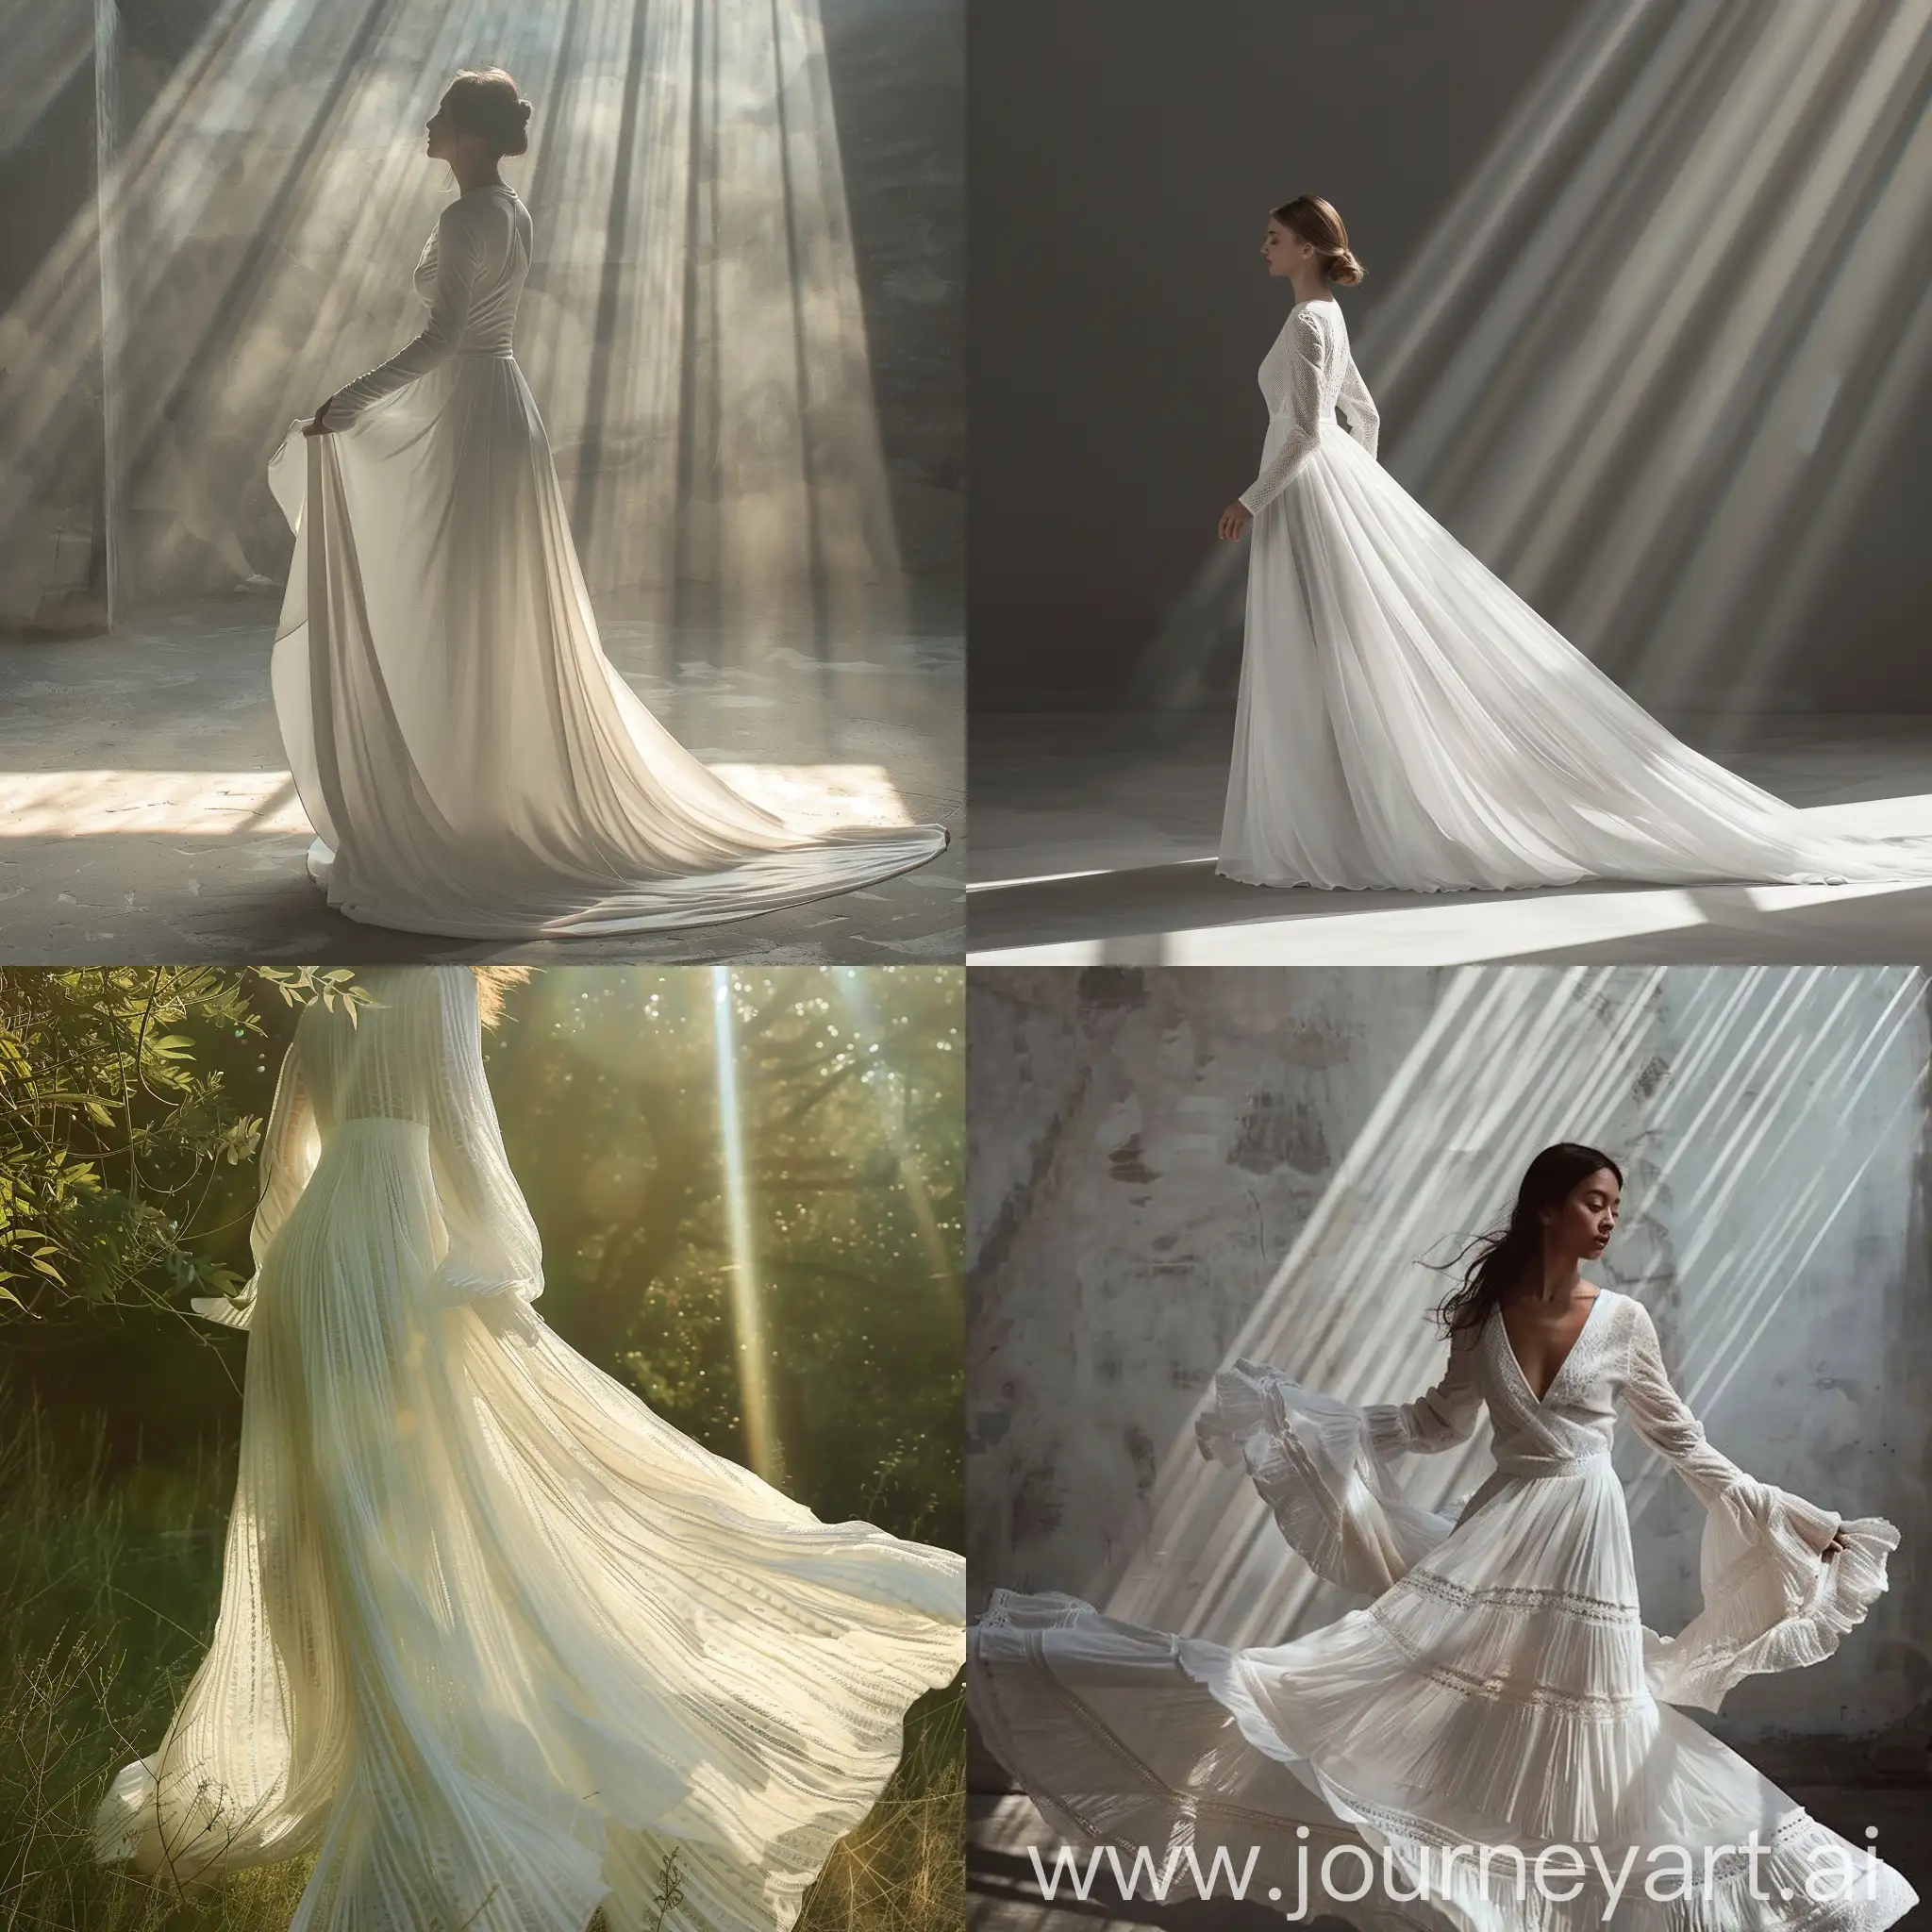 Elegant-White-Texture-Dress-Bathed-in-Sun-Rays